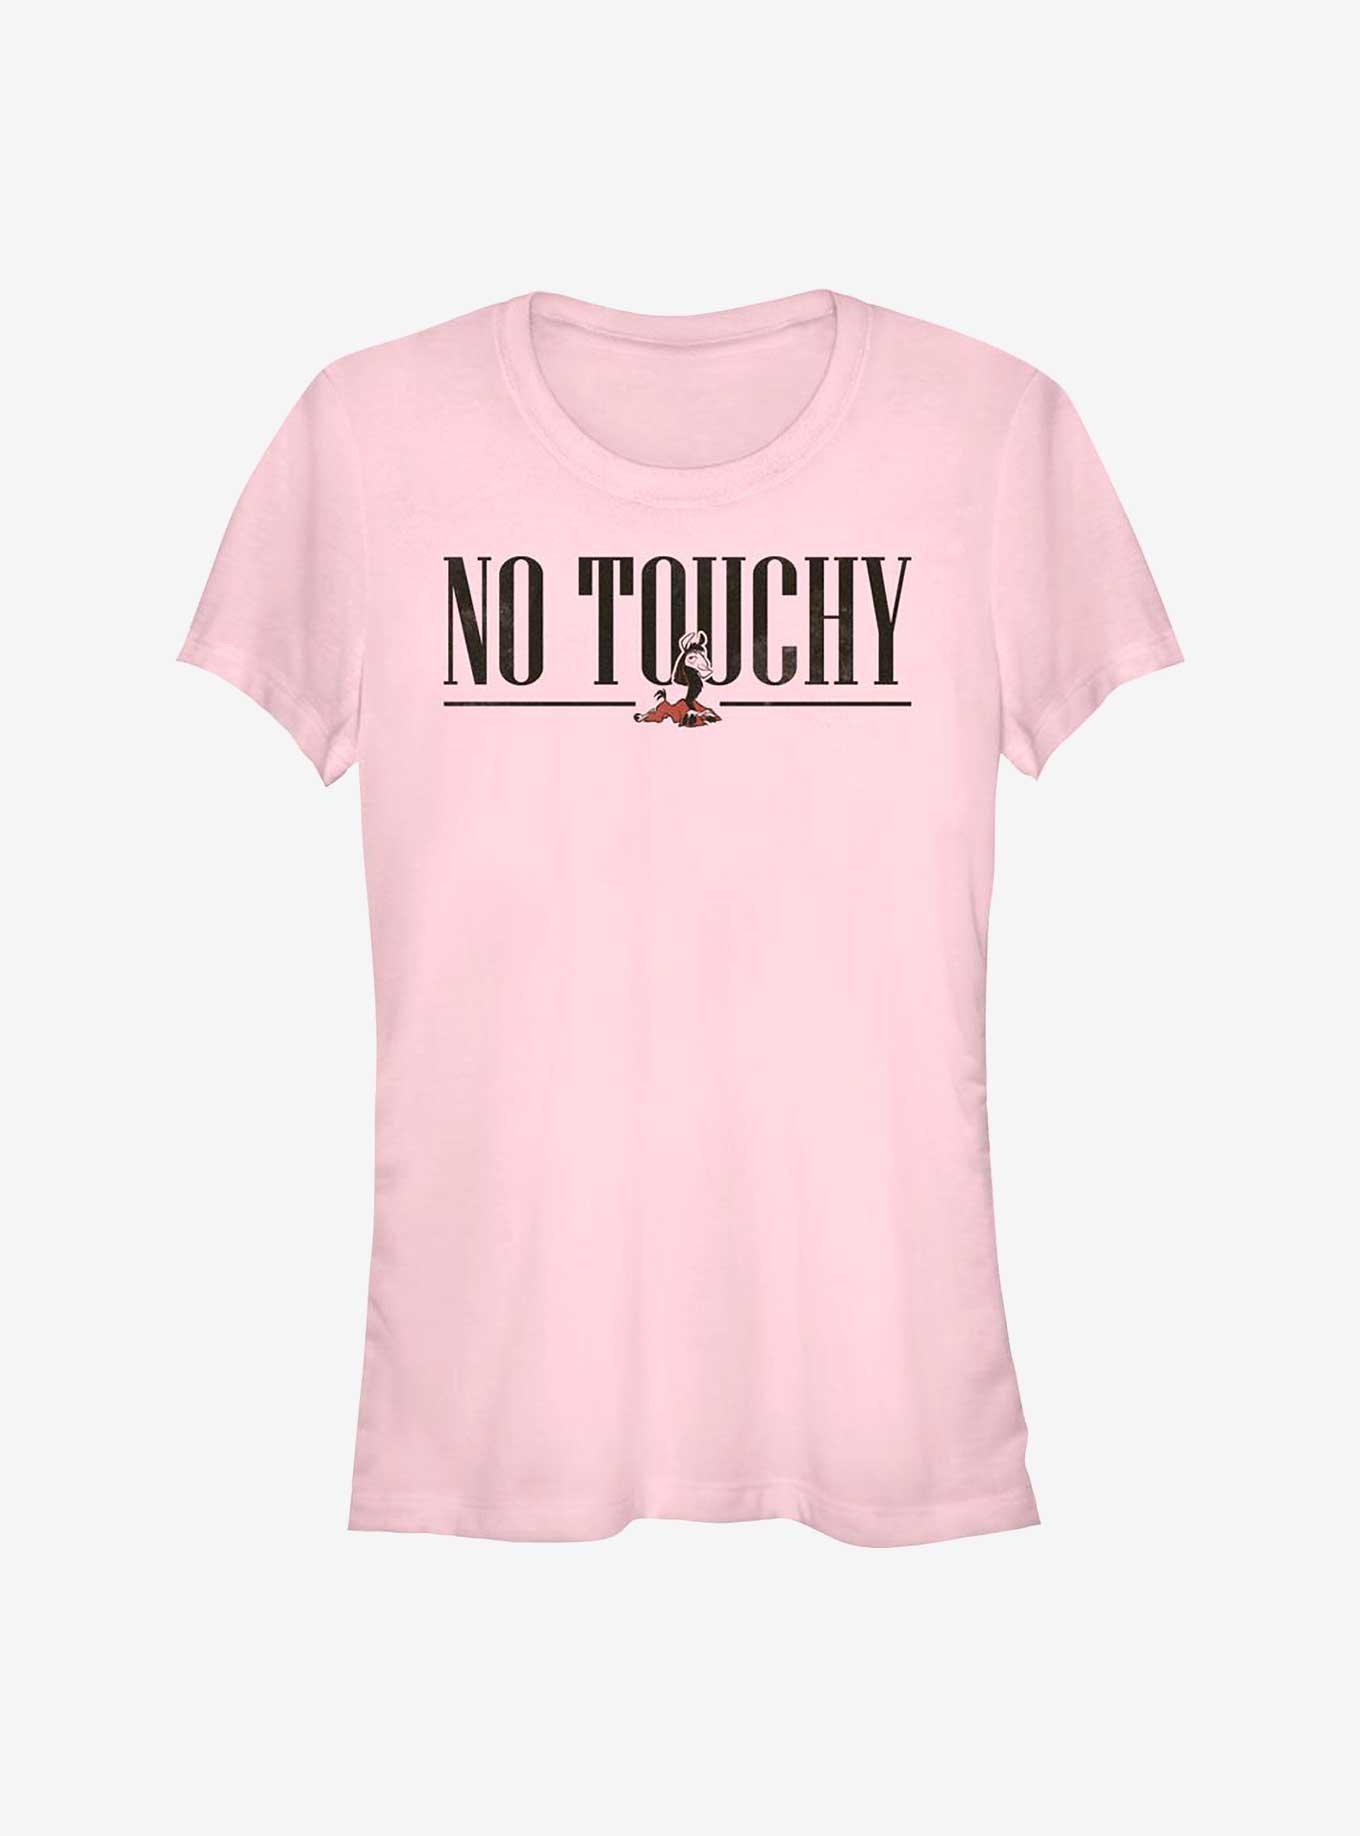 Disney The Emperor's New Groove Kuzco No Touchy Girls T-Shirt, LIGHT PINK, hi-res